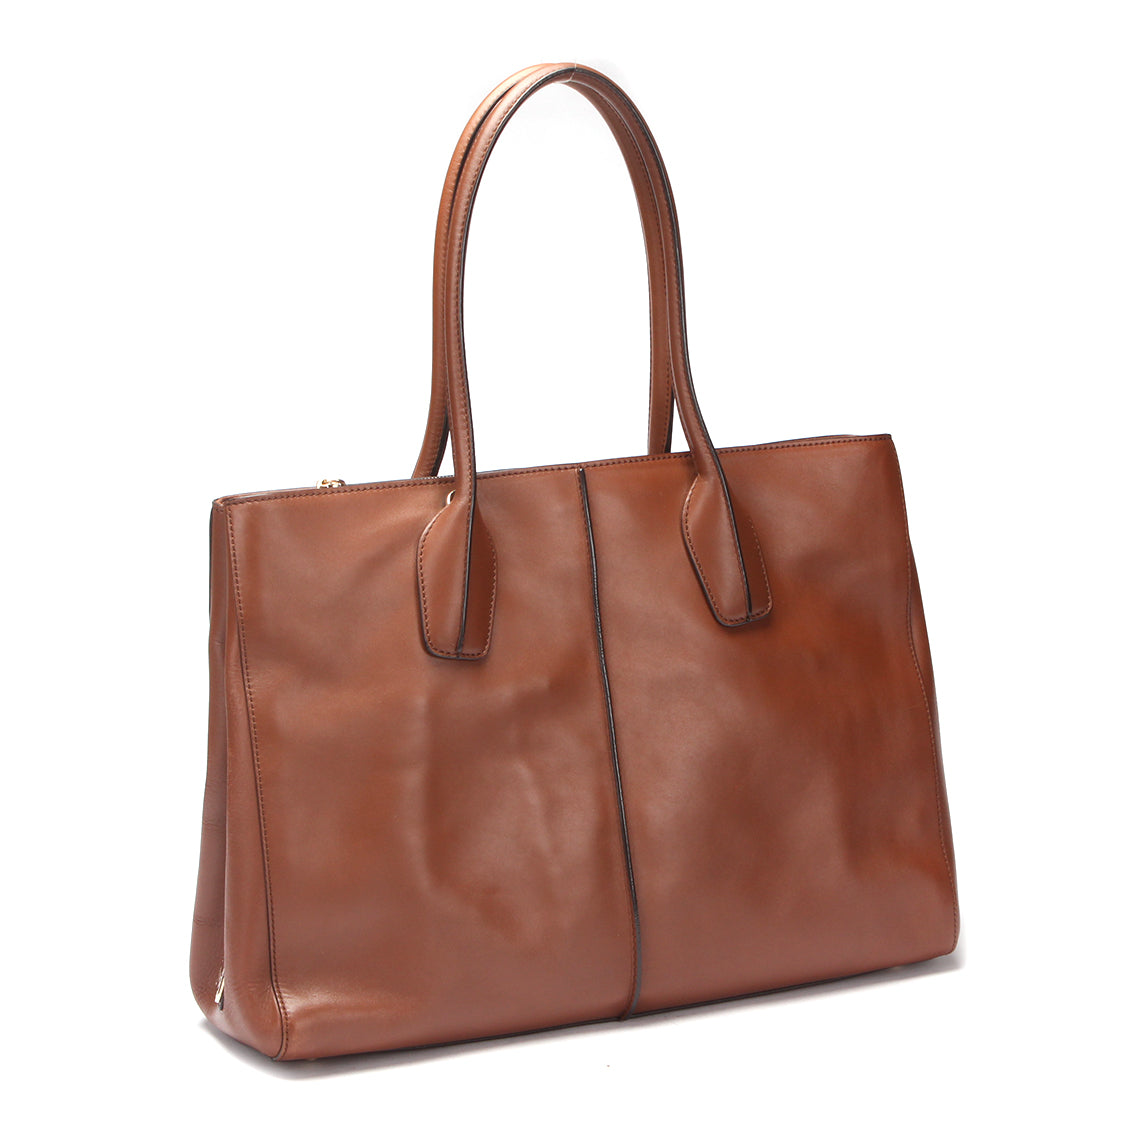 D Styling Shopper Tote